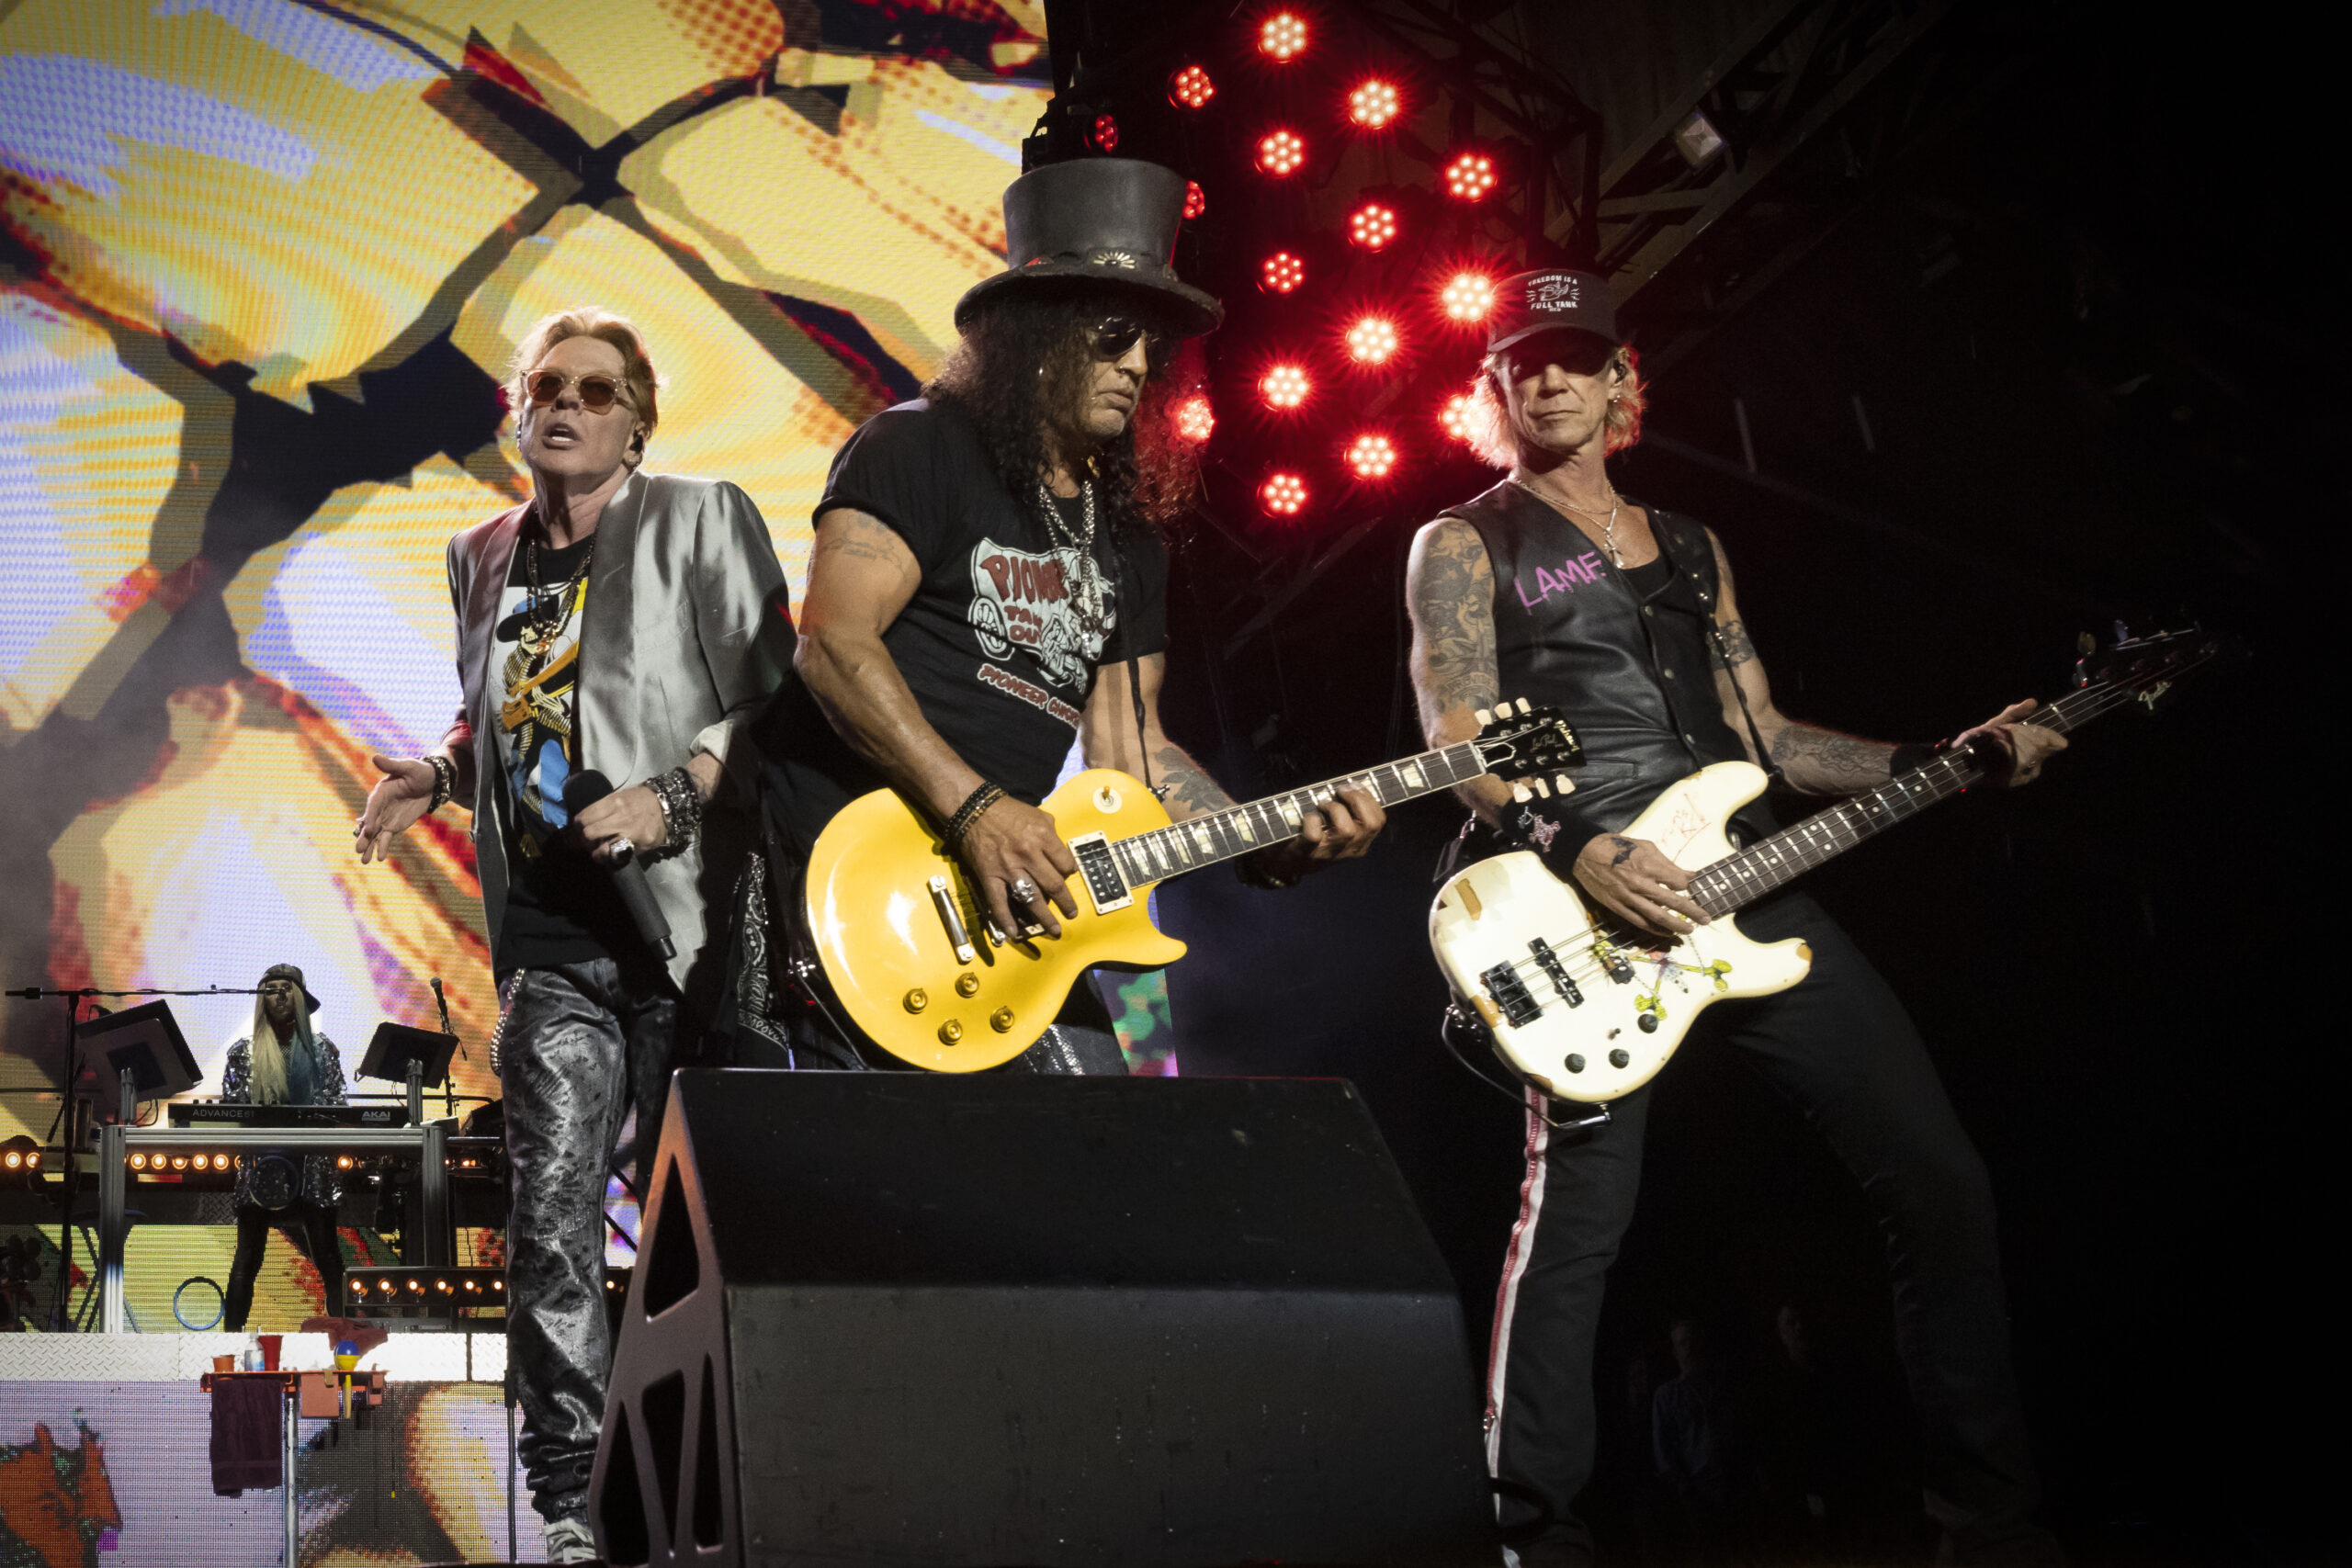 Guns N' Roses concert, Steelers game on Pittsburgh's North Shore